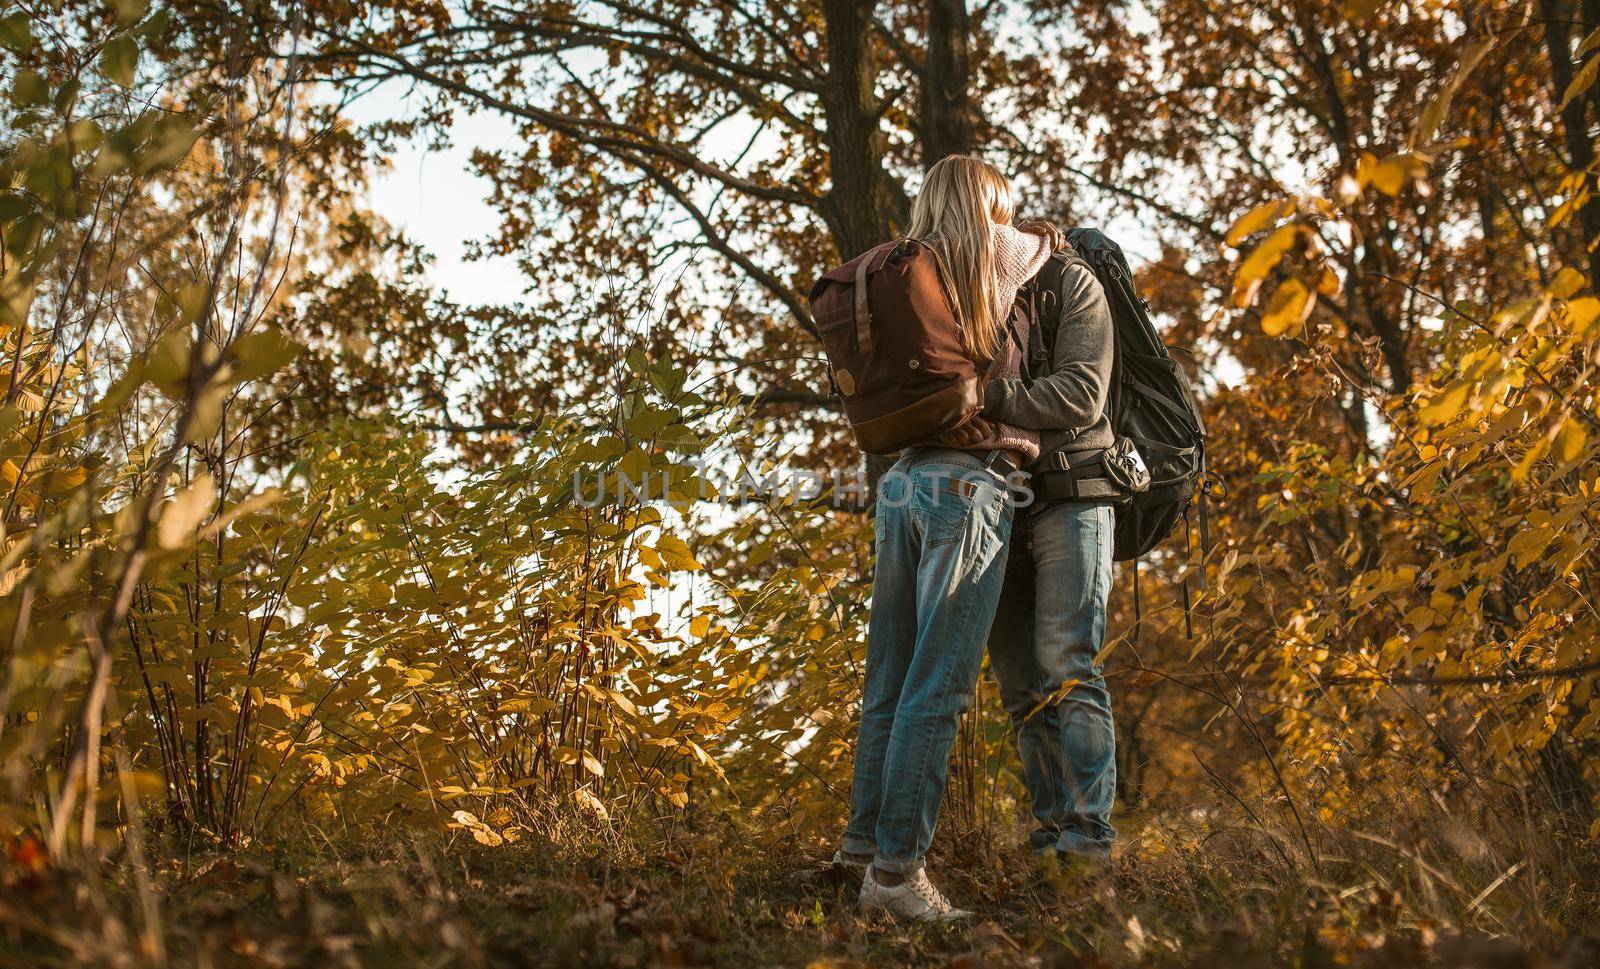 Kiss of backpackers in love hugging while standing alone against the backdrop of autumn forest outdoors. Love in nature concept.